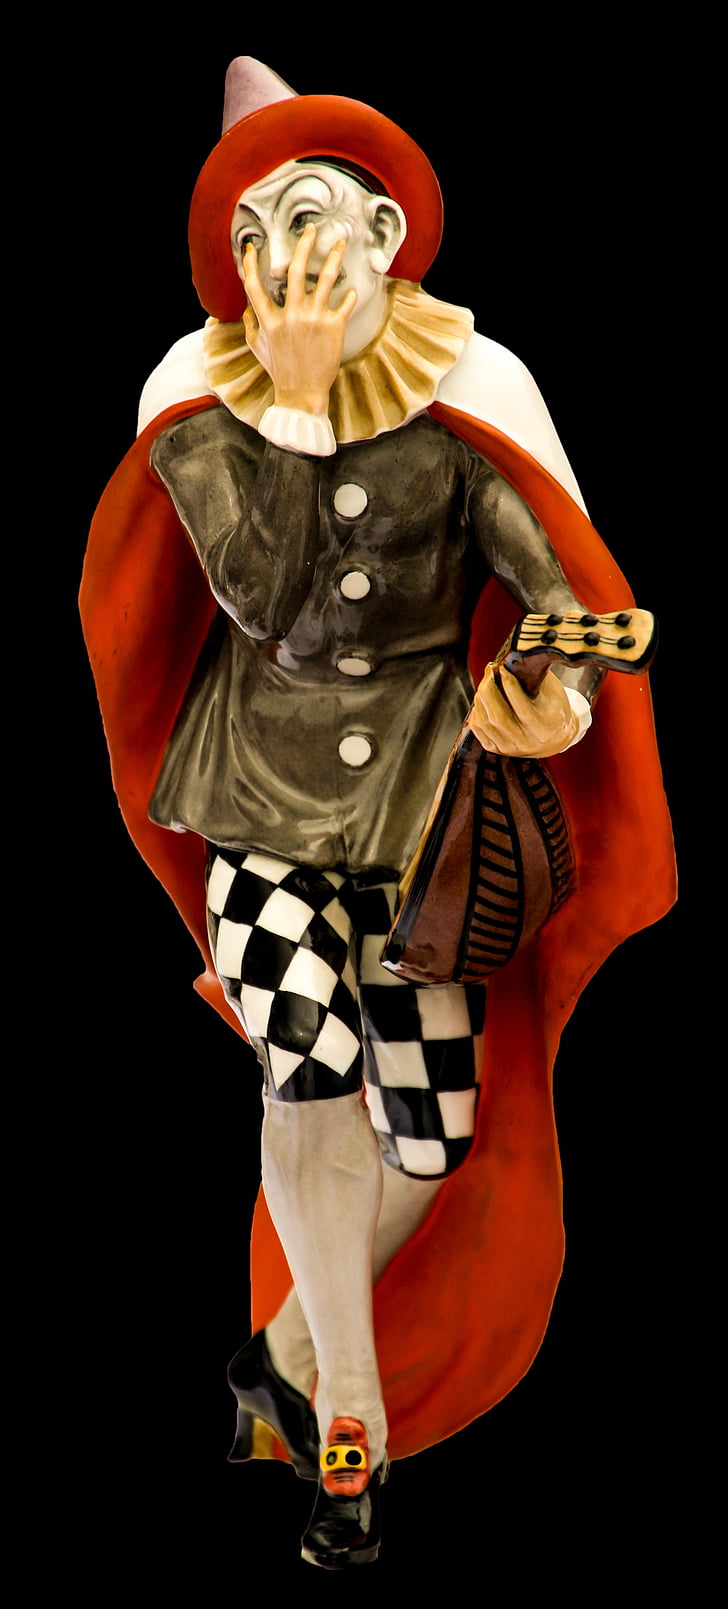 clown, figure, porcelain, decoration, funny, isolated, deco